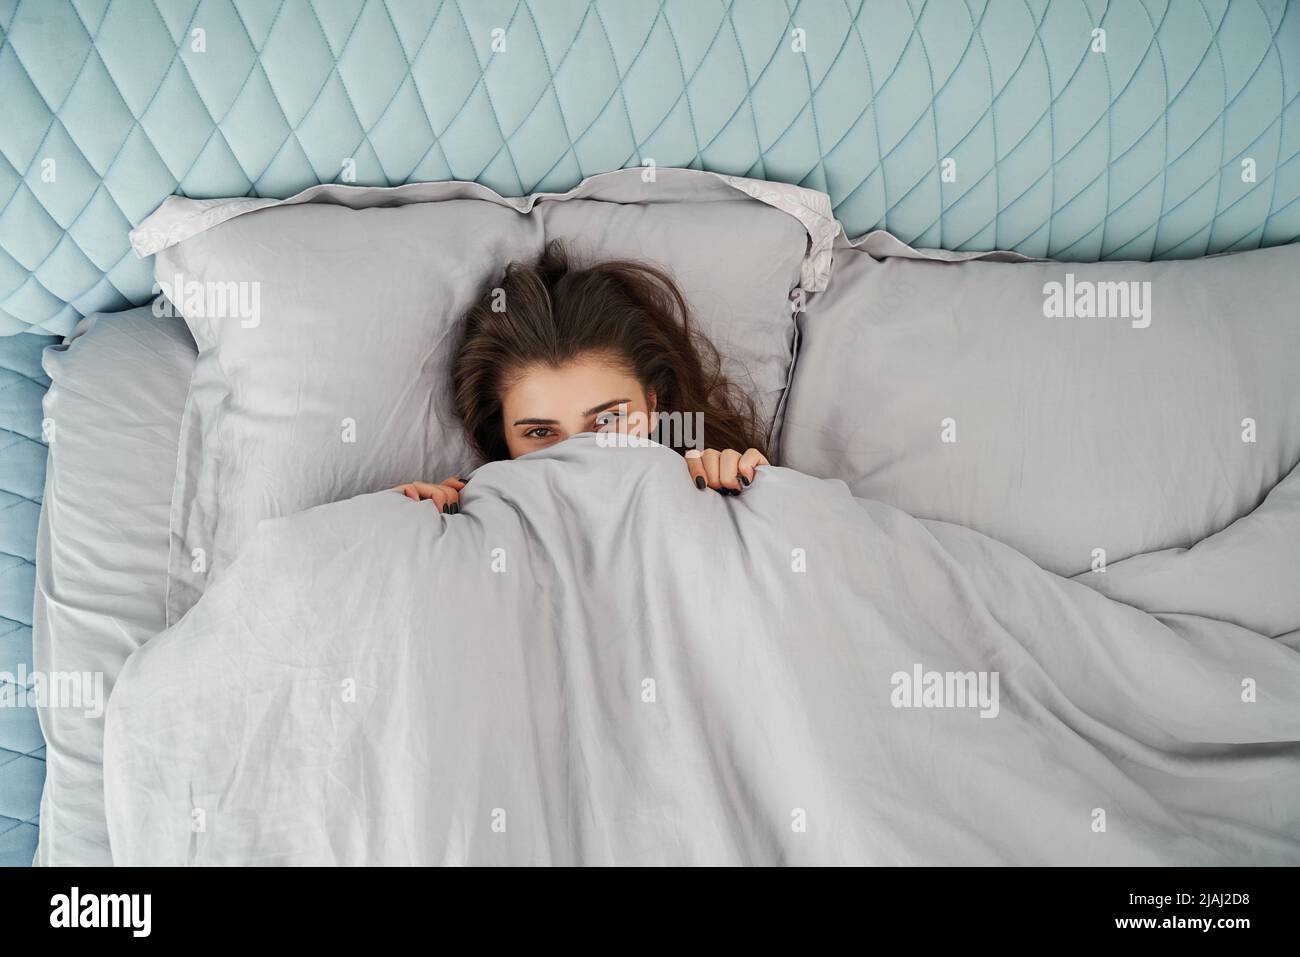 Beautiful woman awake in comfort bed. Rest, bed linen. Apartment. Home lifestyle Stock Photo